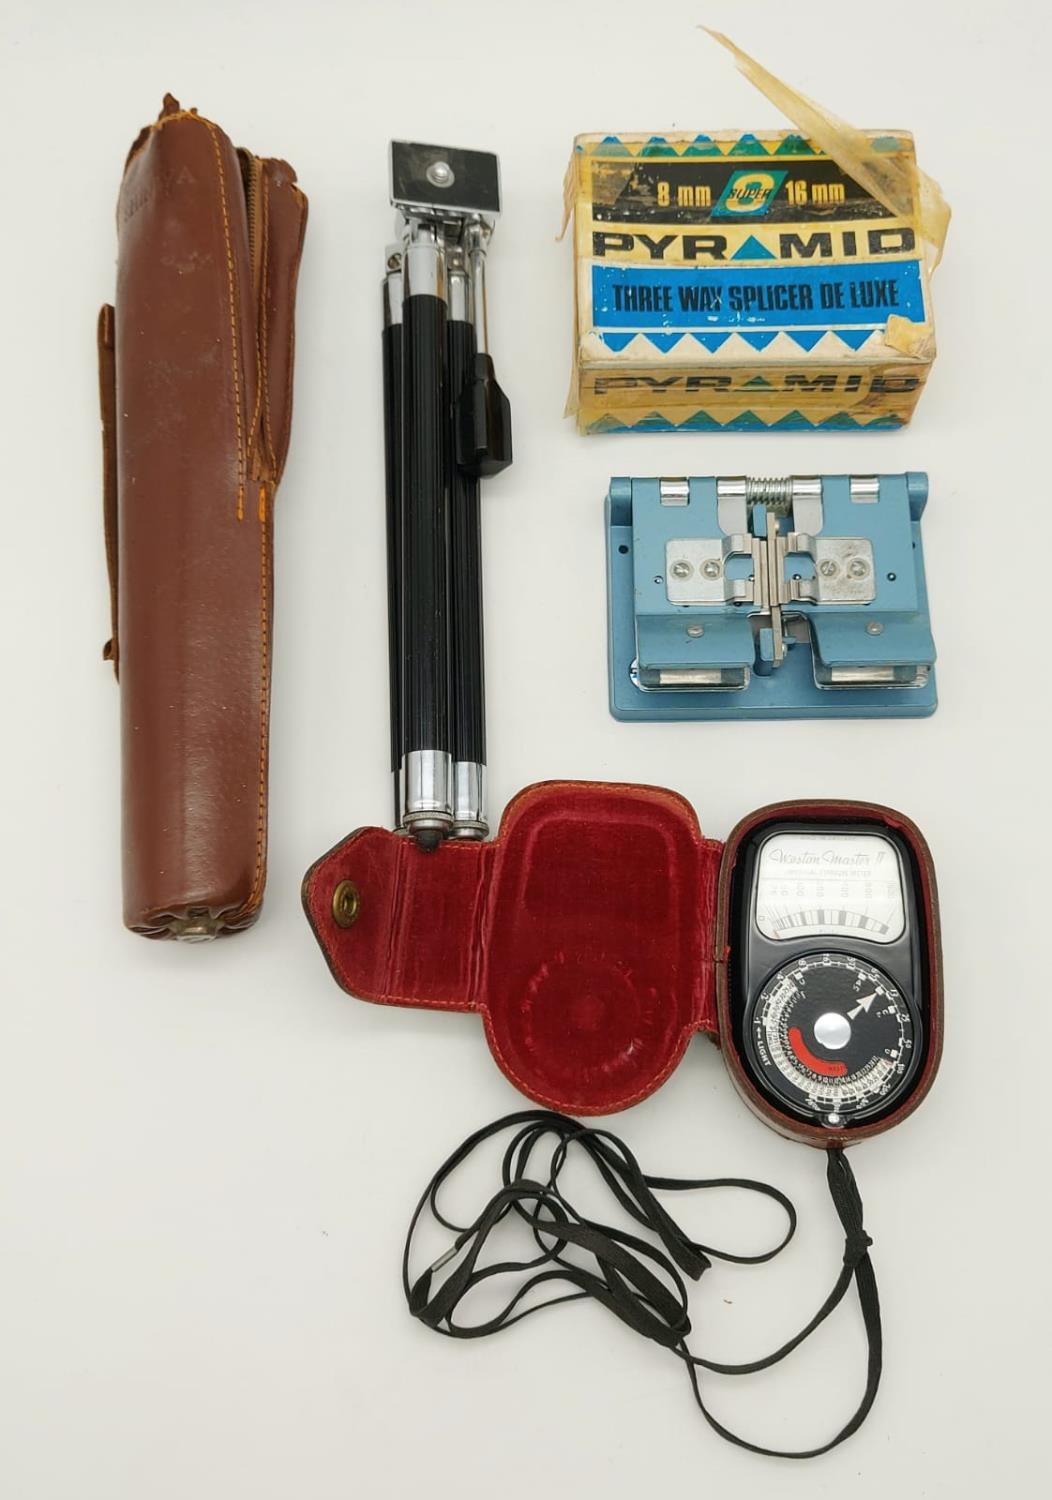 A Vintage Weston Master Light Meter (in leather case), a Pyramid 8-16mm 3 -way film splicer and a